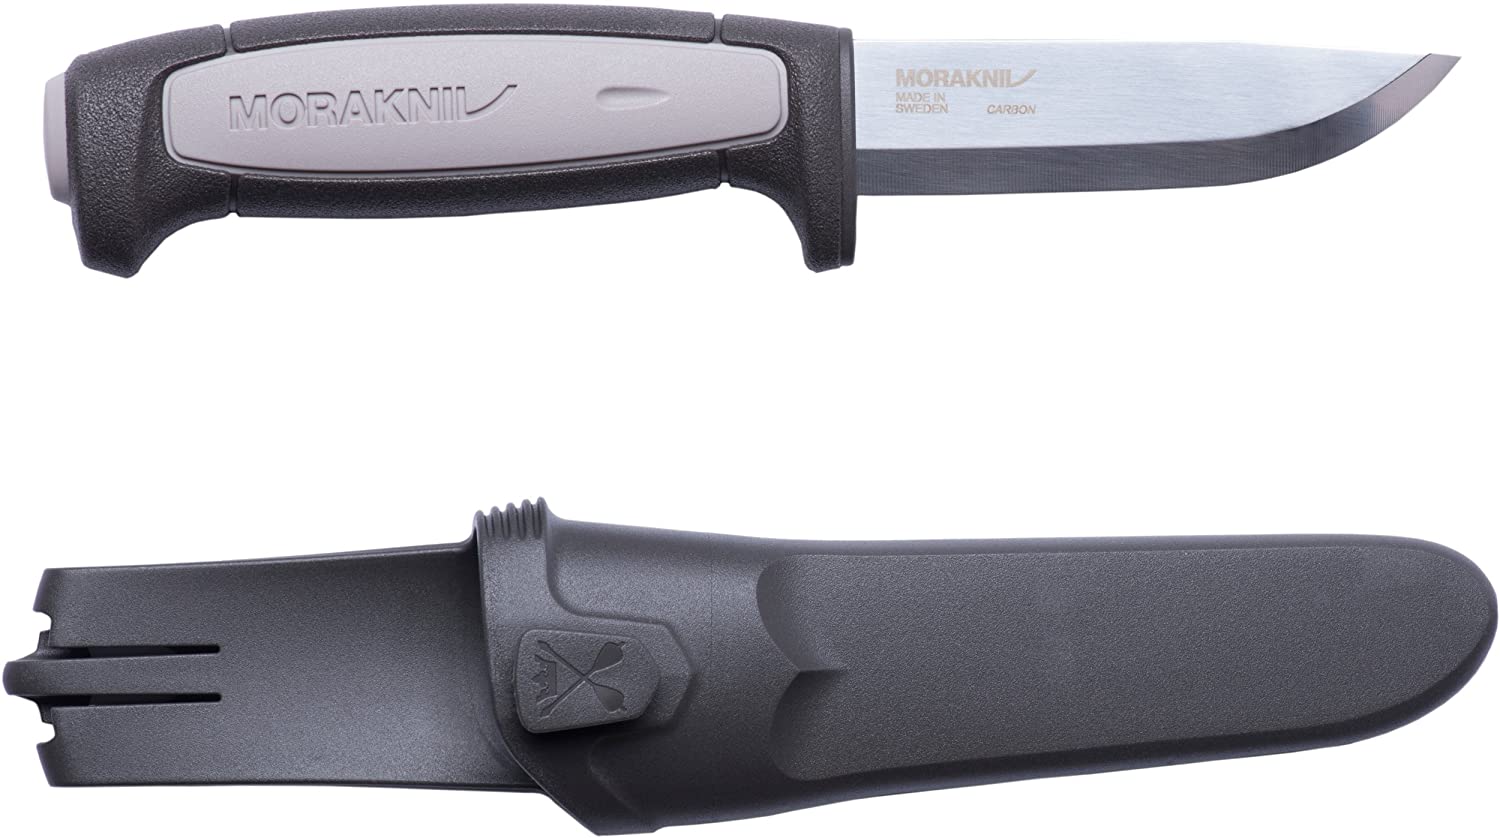 Morakniv Craftline Robust Trade Knife with Carbon Steel Blade and Combi Sheath, 3.6-Inch